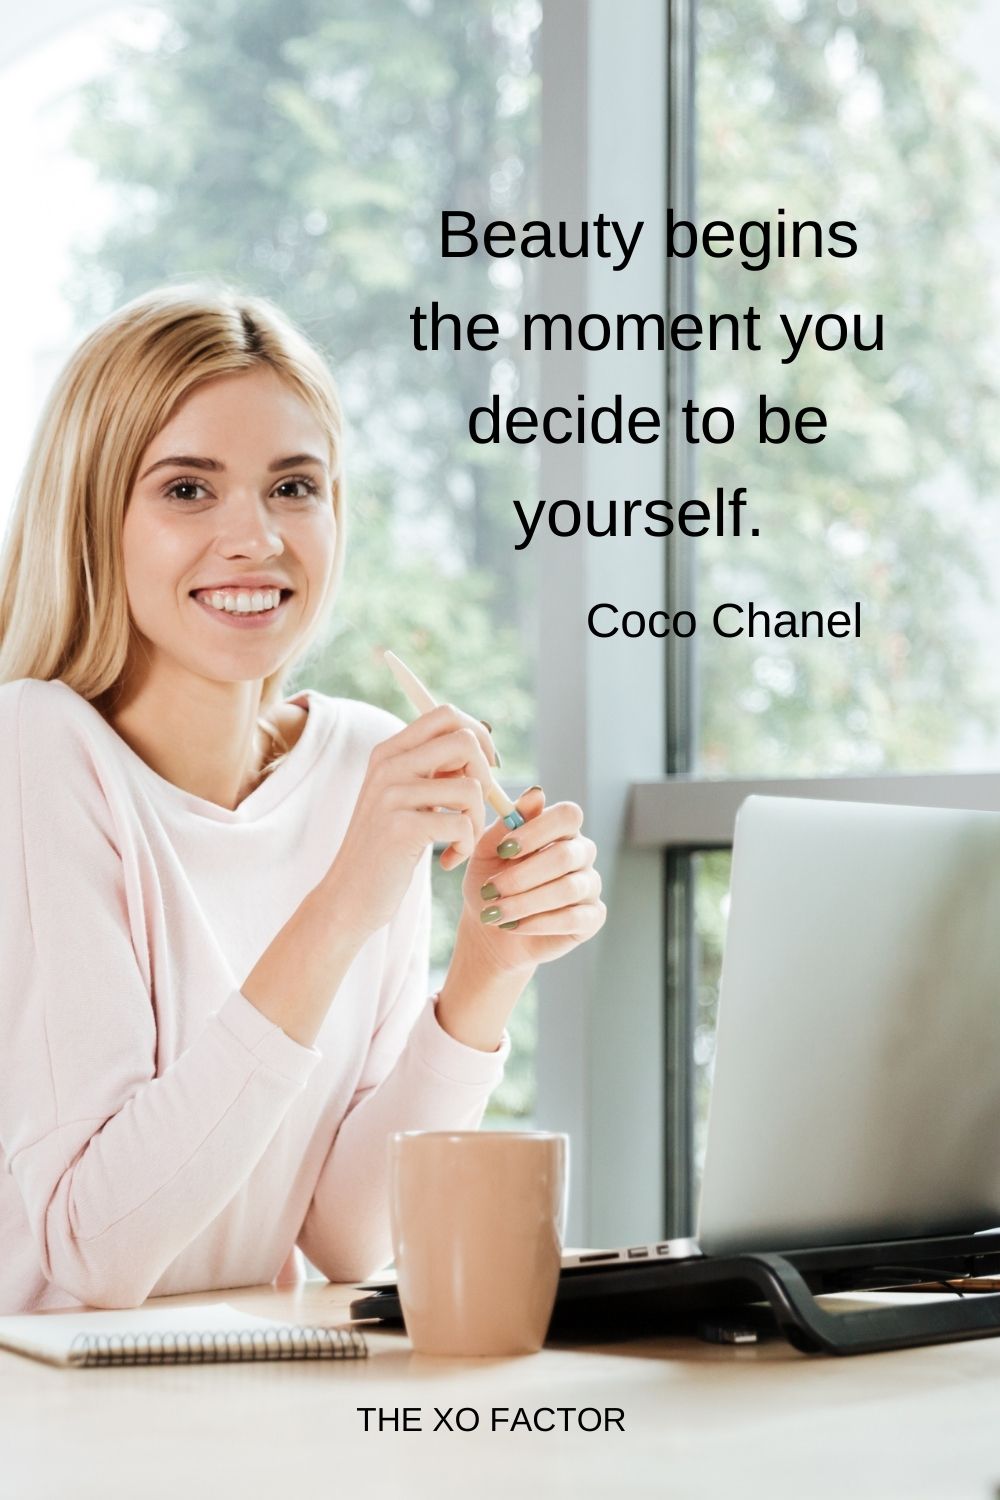 Beauty begins the moment you decide to be yourself. Coco Chanel